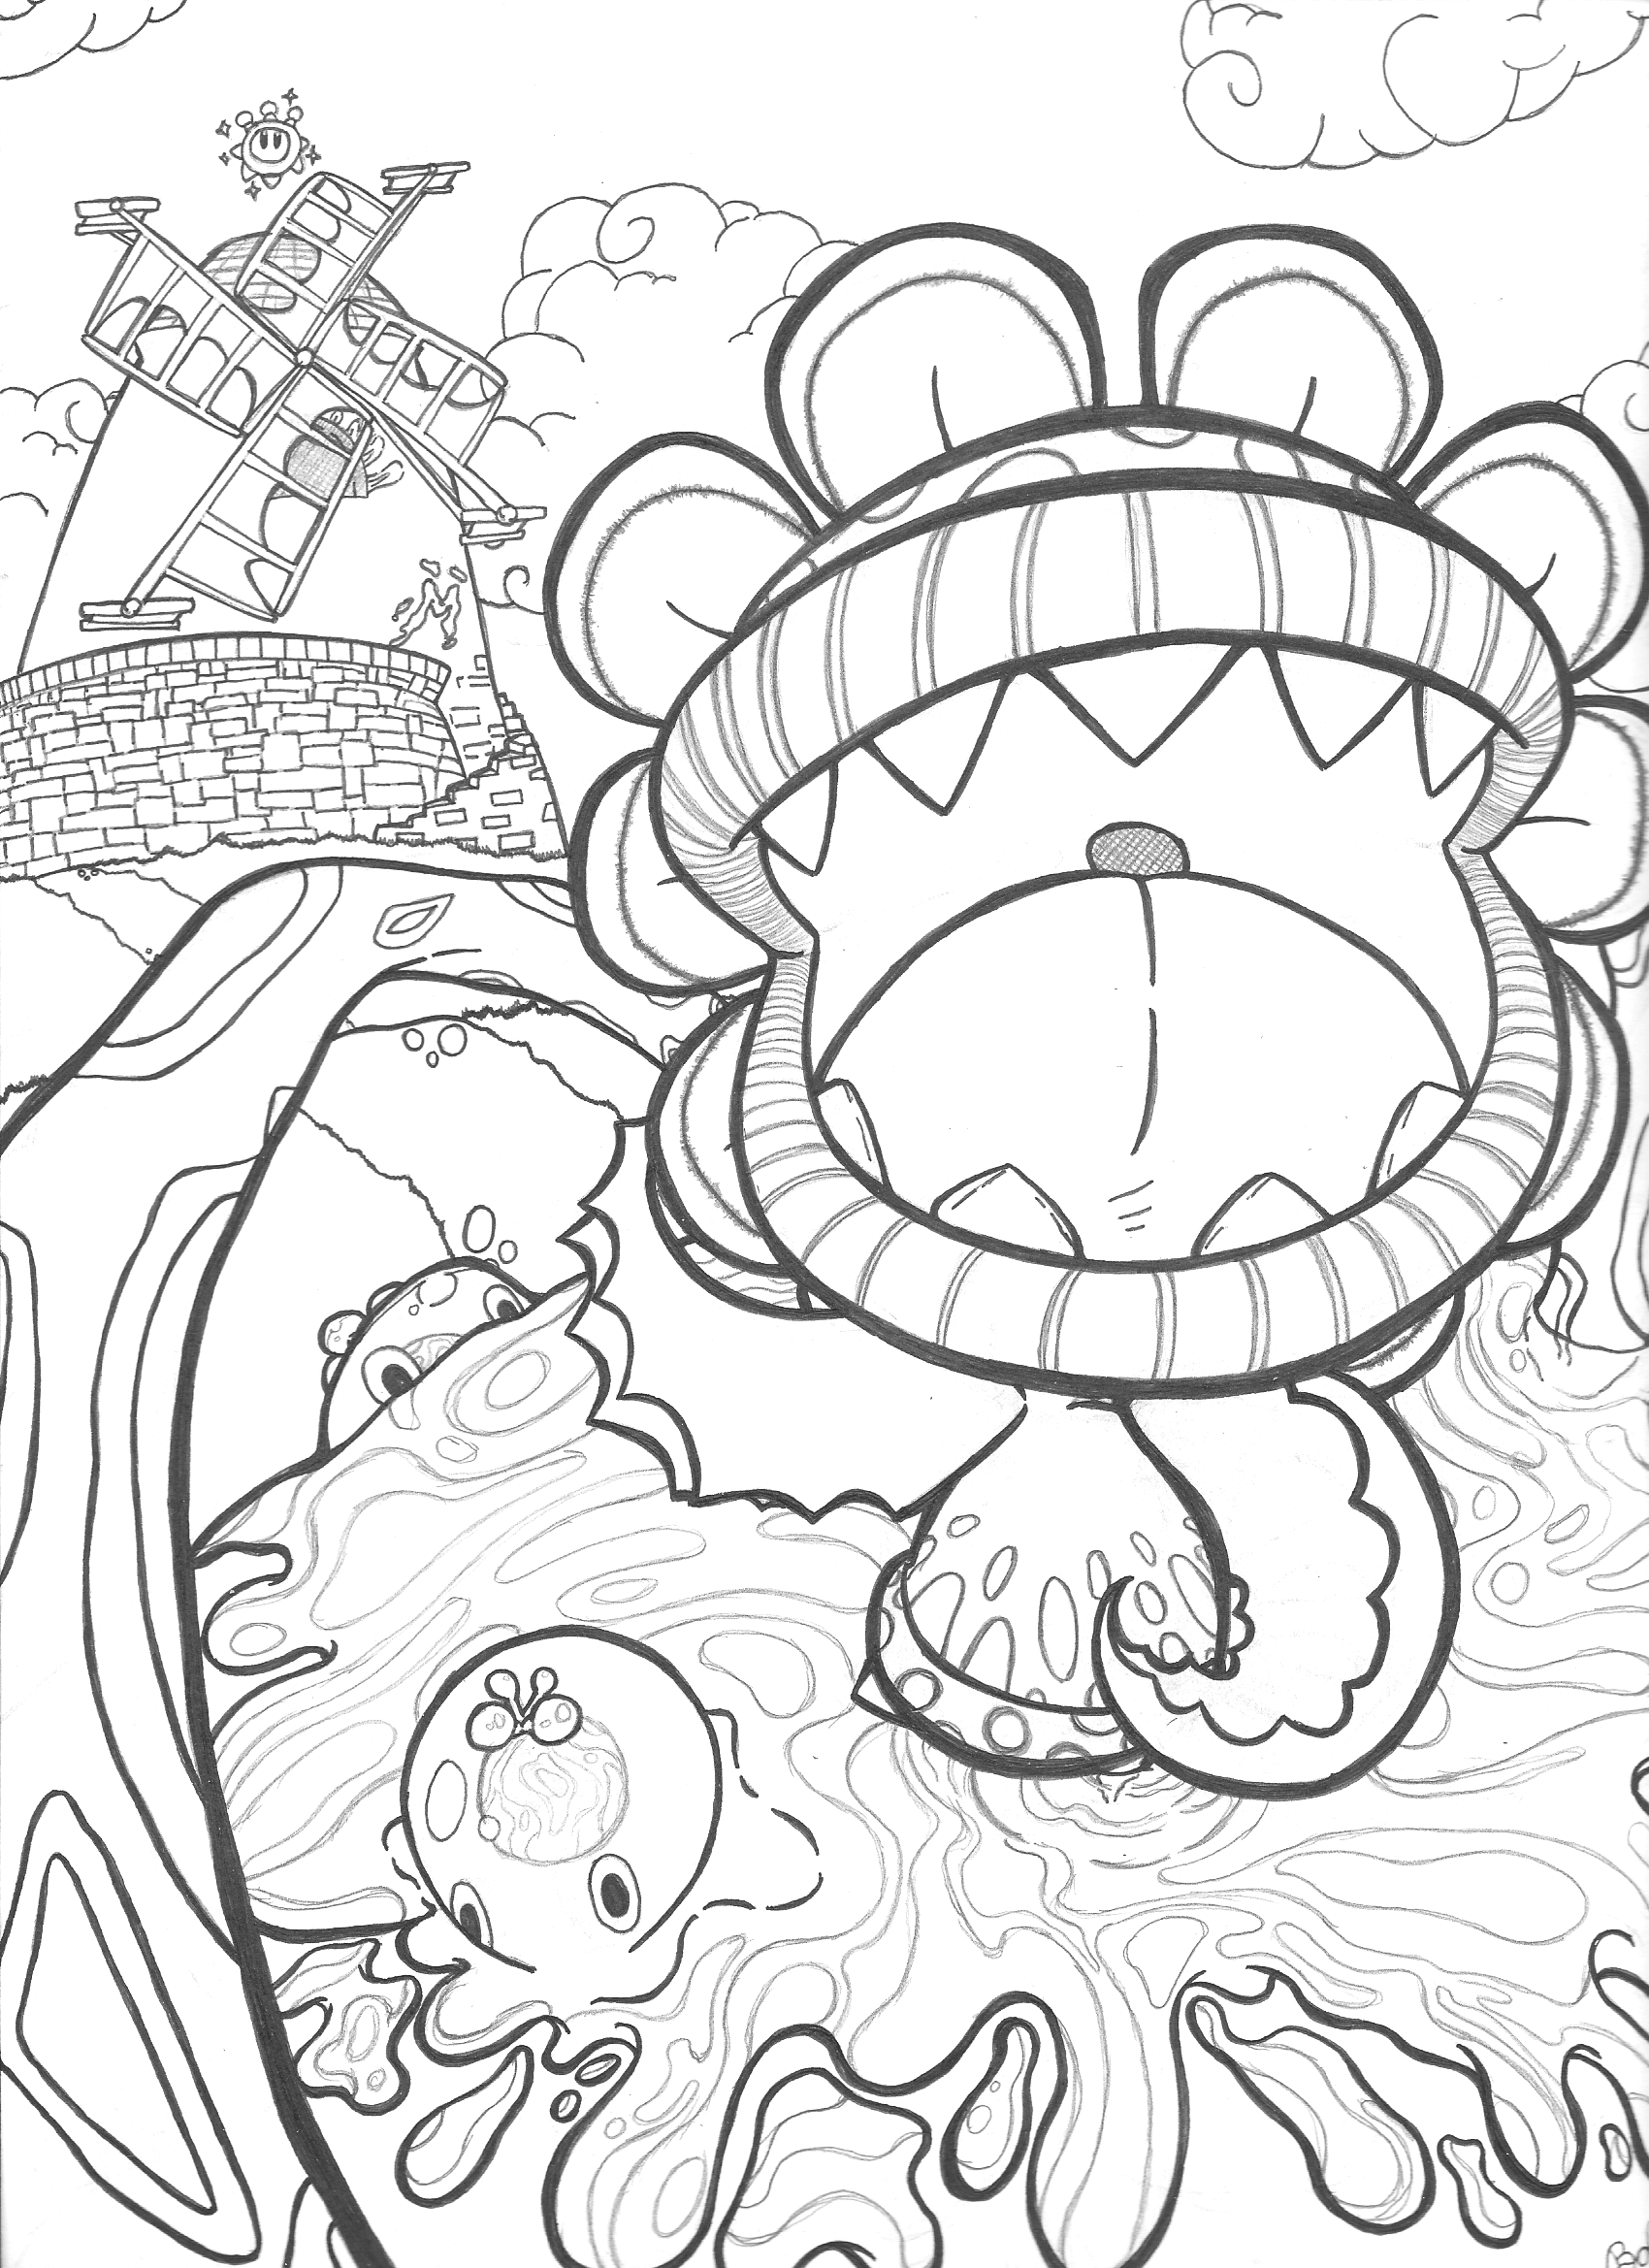 Down With Petey Piranha Mario Sunshine Commission By Sketch Coloring Page.